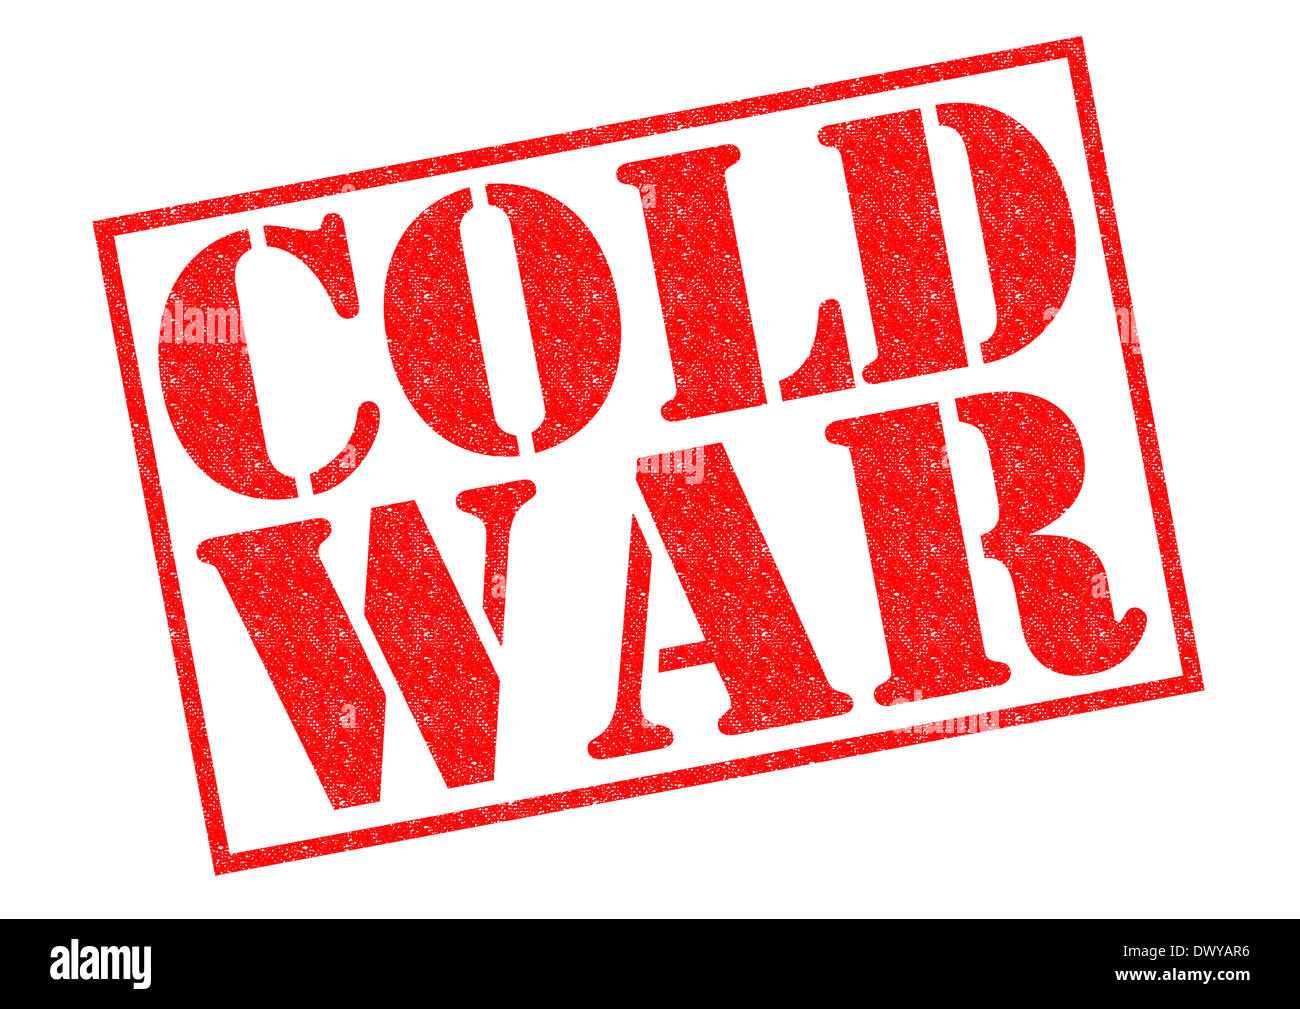 COLD WAR red Rubber Stamp over a white background Stock Photo - Alamy